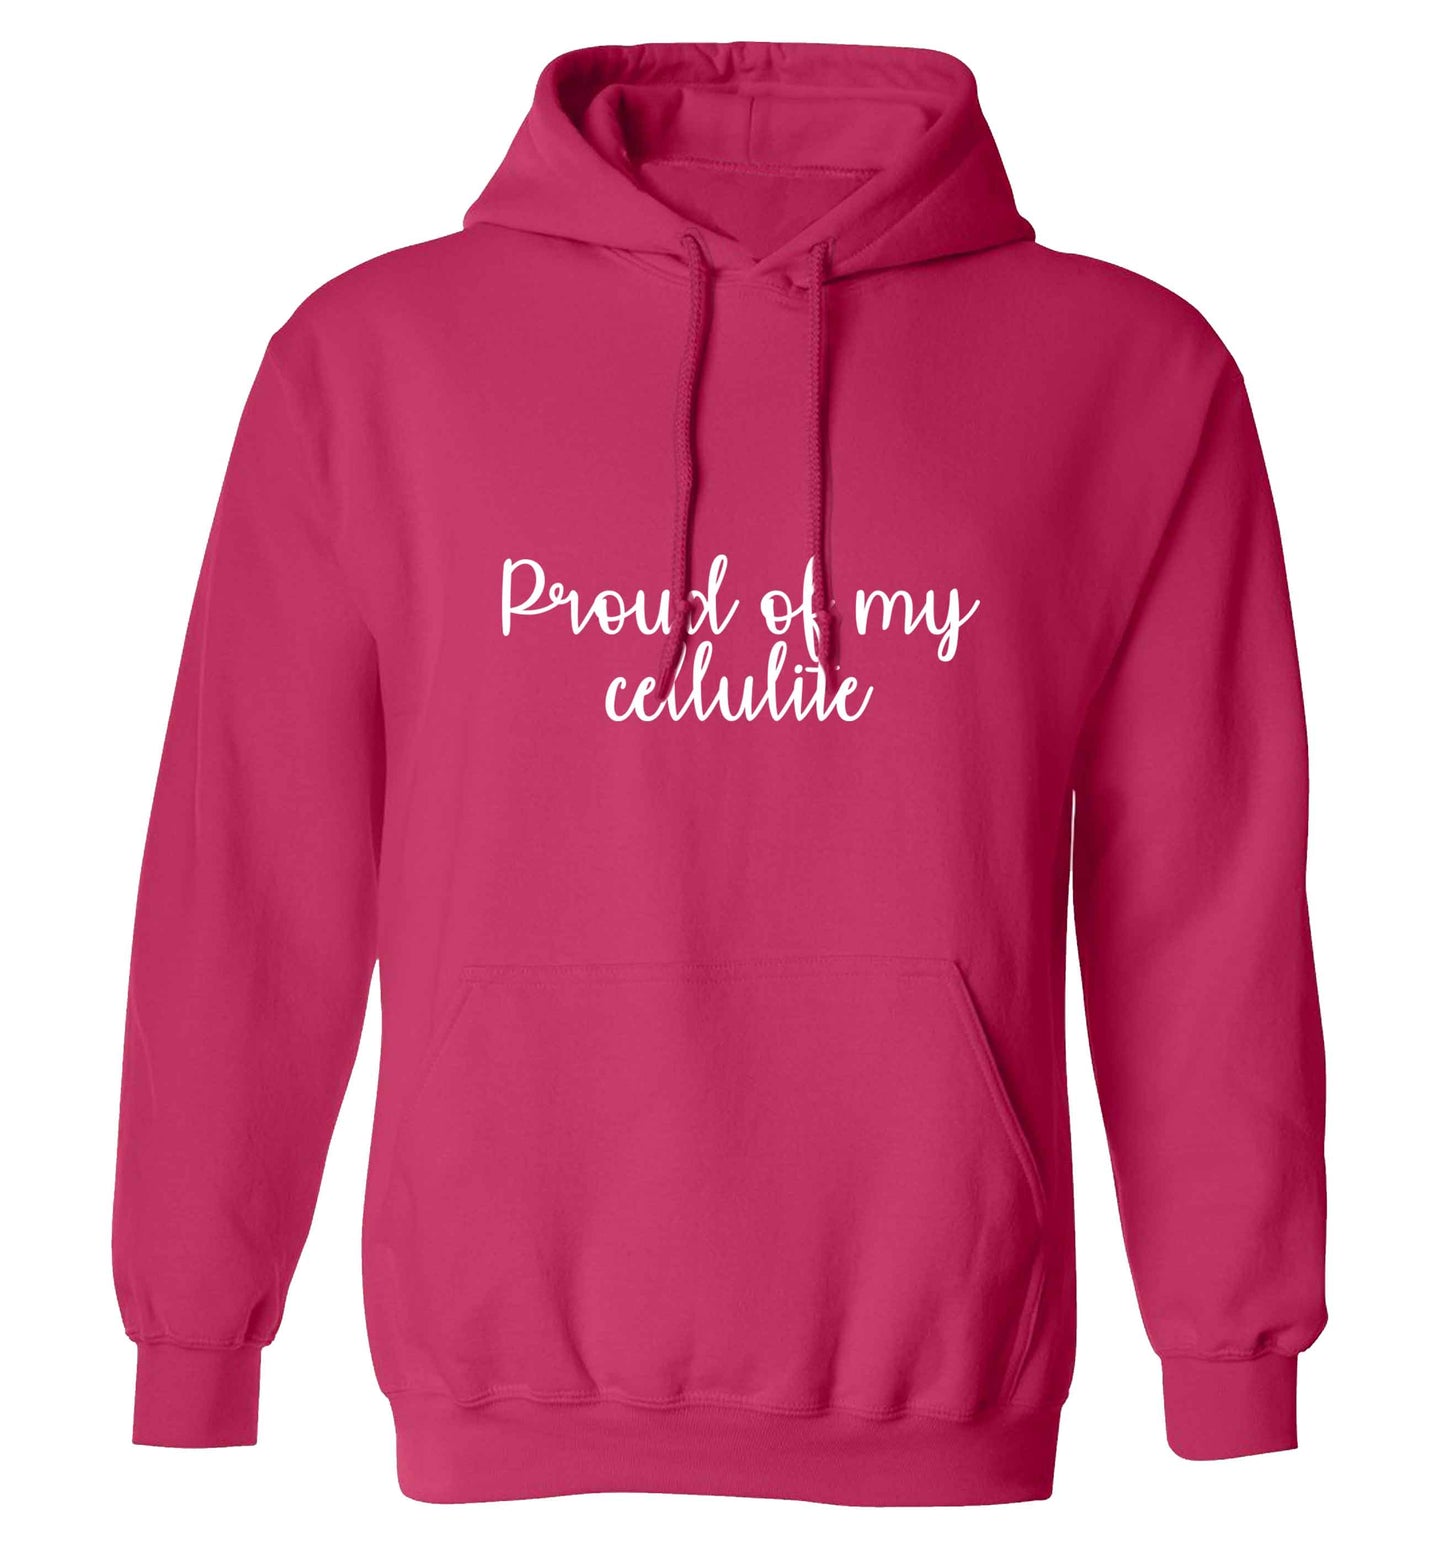 Proud of my cellulite adults unisex pink hoodie 2XL